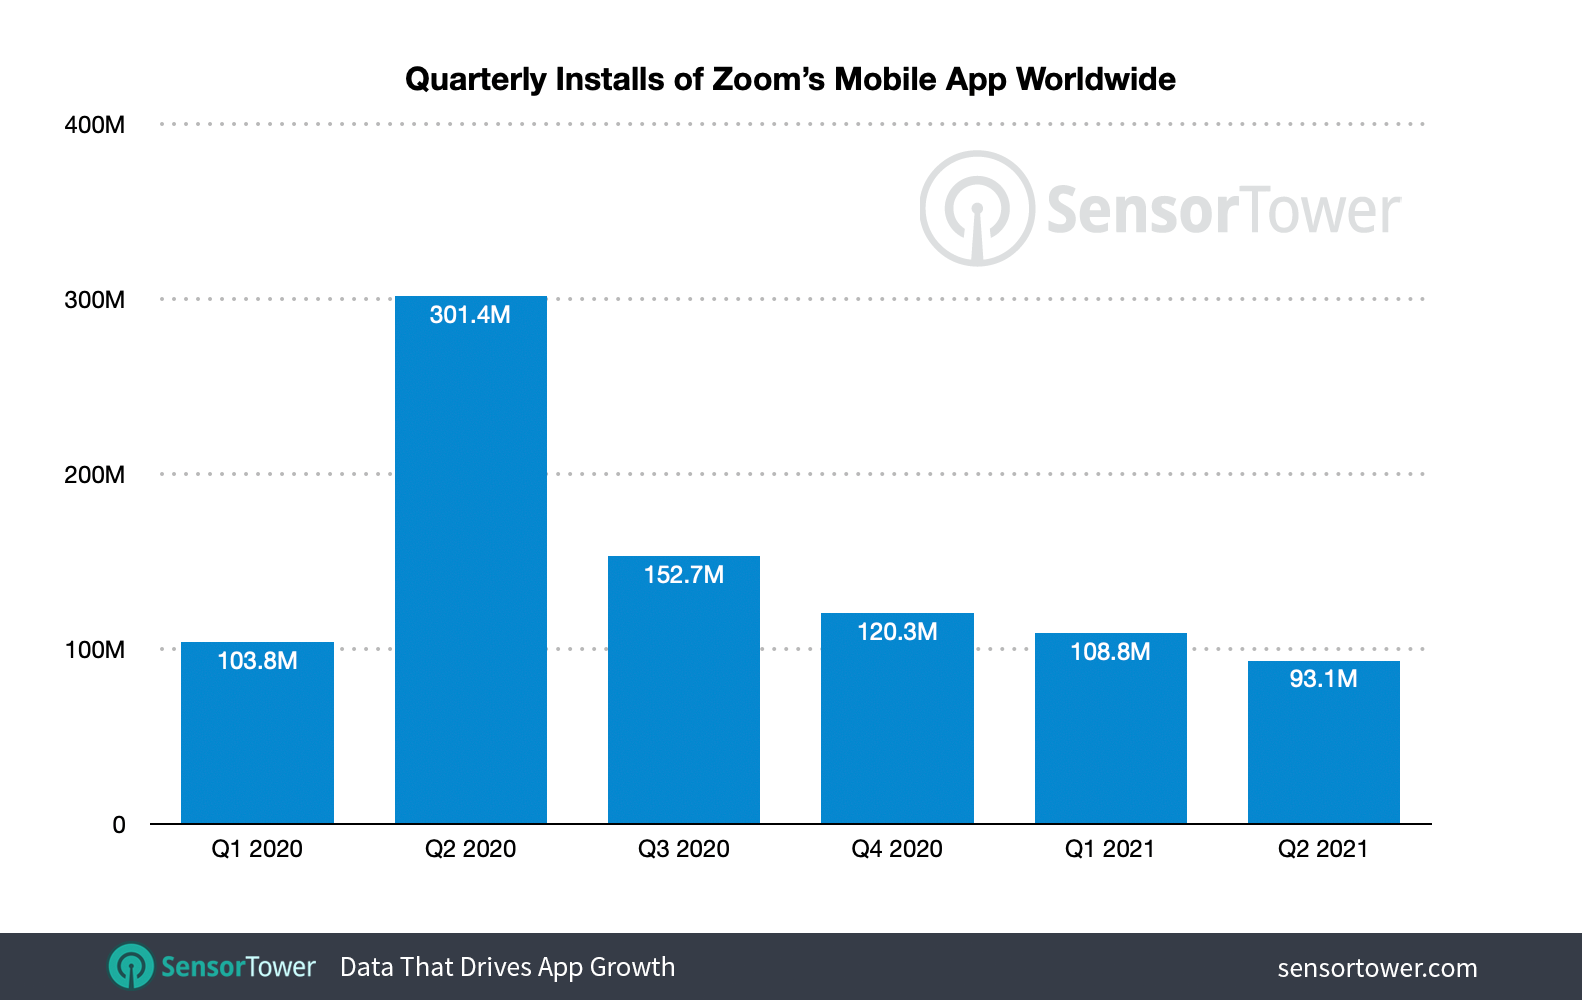 Zoom adoption spiked in Q2 2020 as it became the most downloaded app worldwide